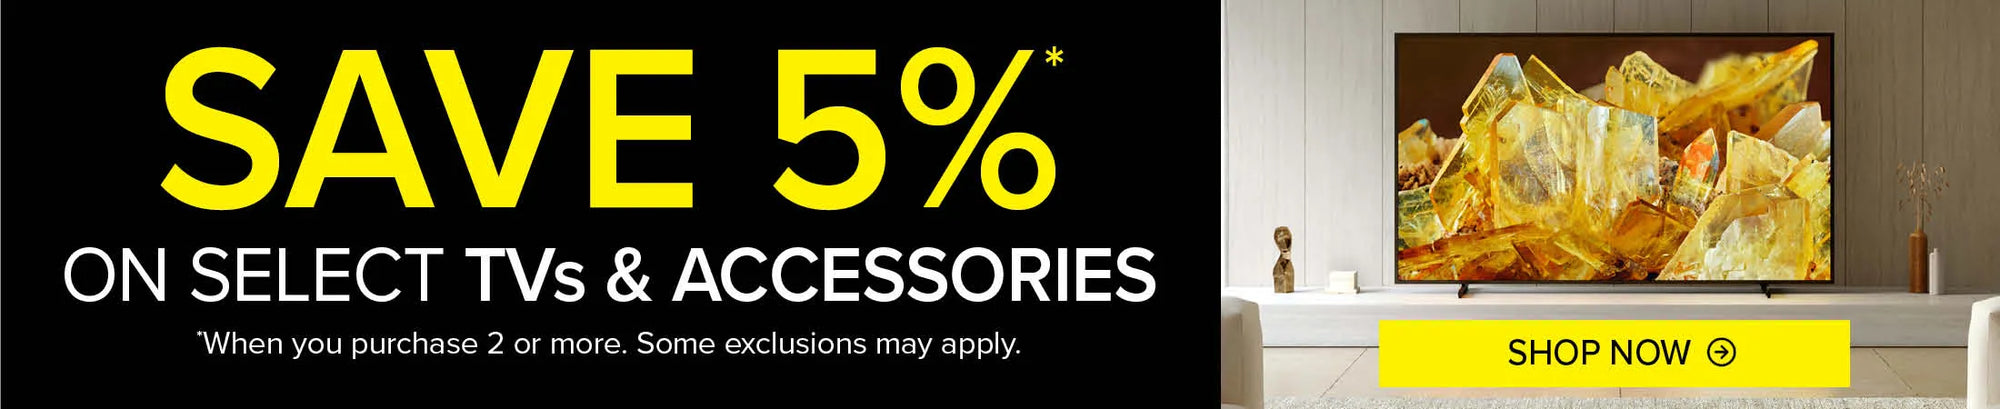 Save 5% on select Electronics when you purchase 2 or more. Some exclusions apply.